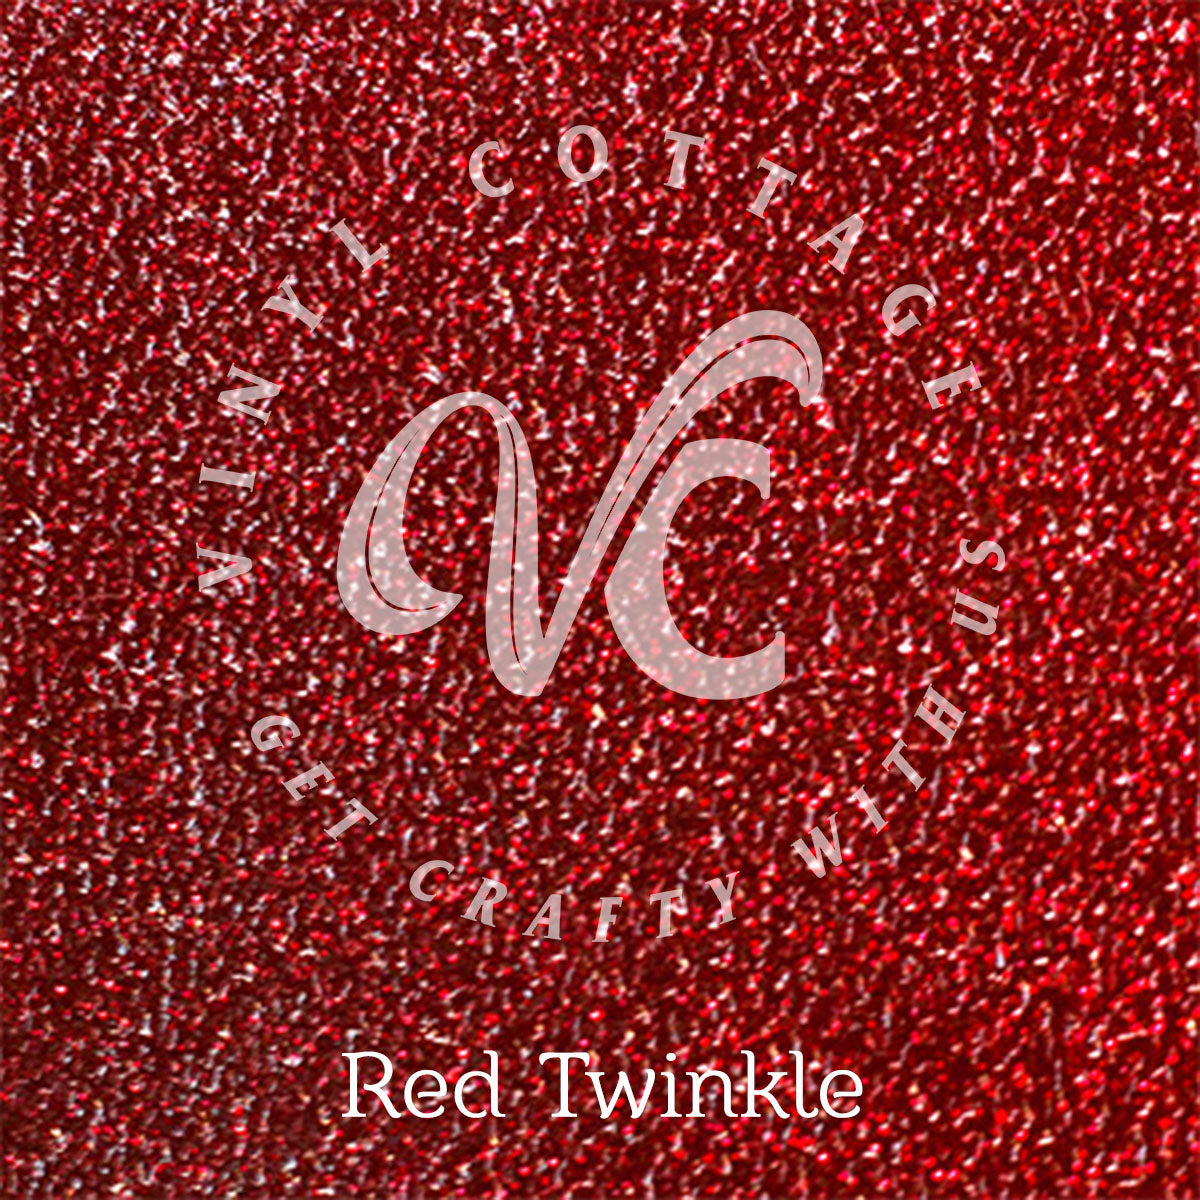 Red Twinkle